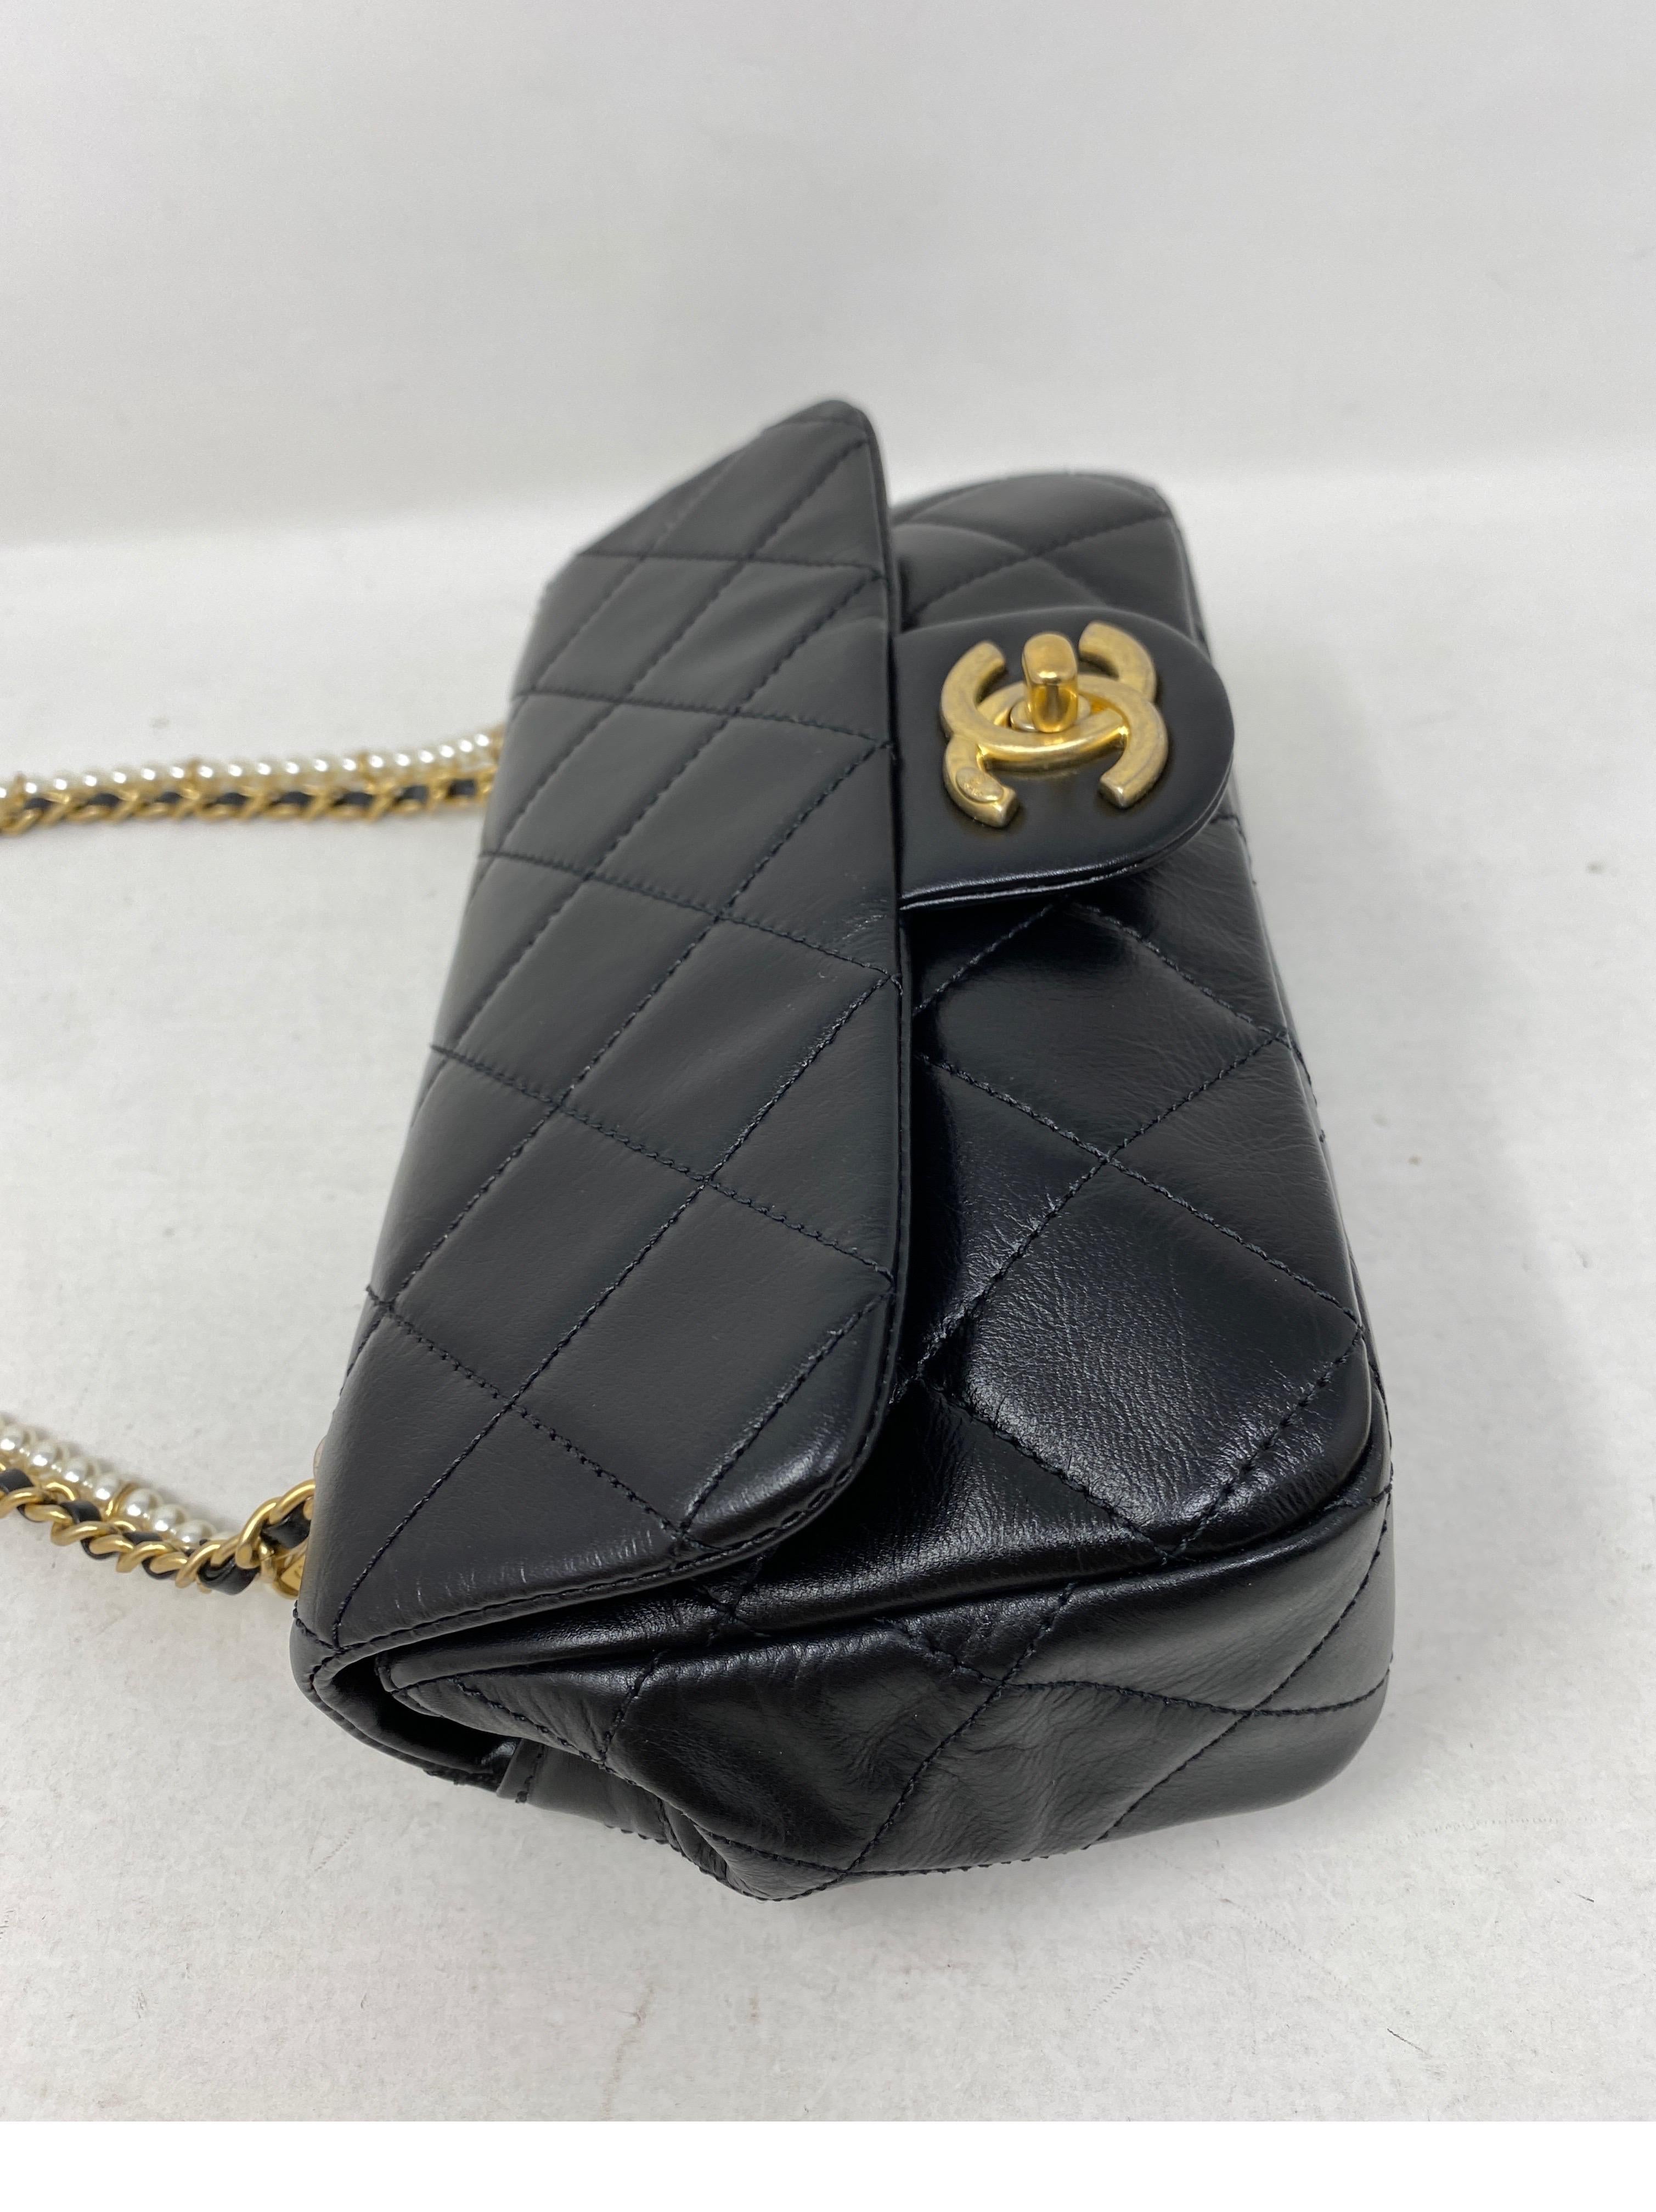 Women's or Men's Chanel Mini with Pearls Crossbody Bag